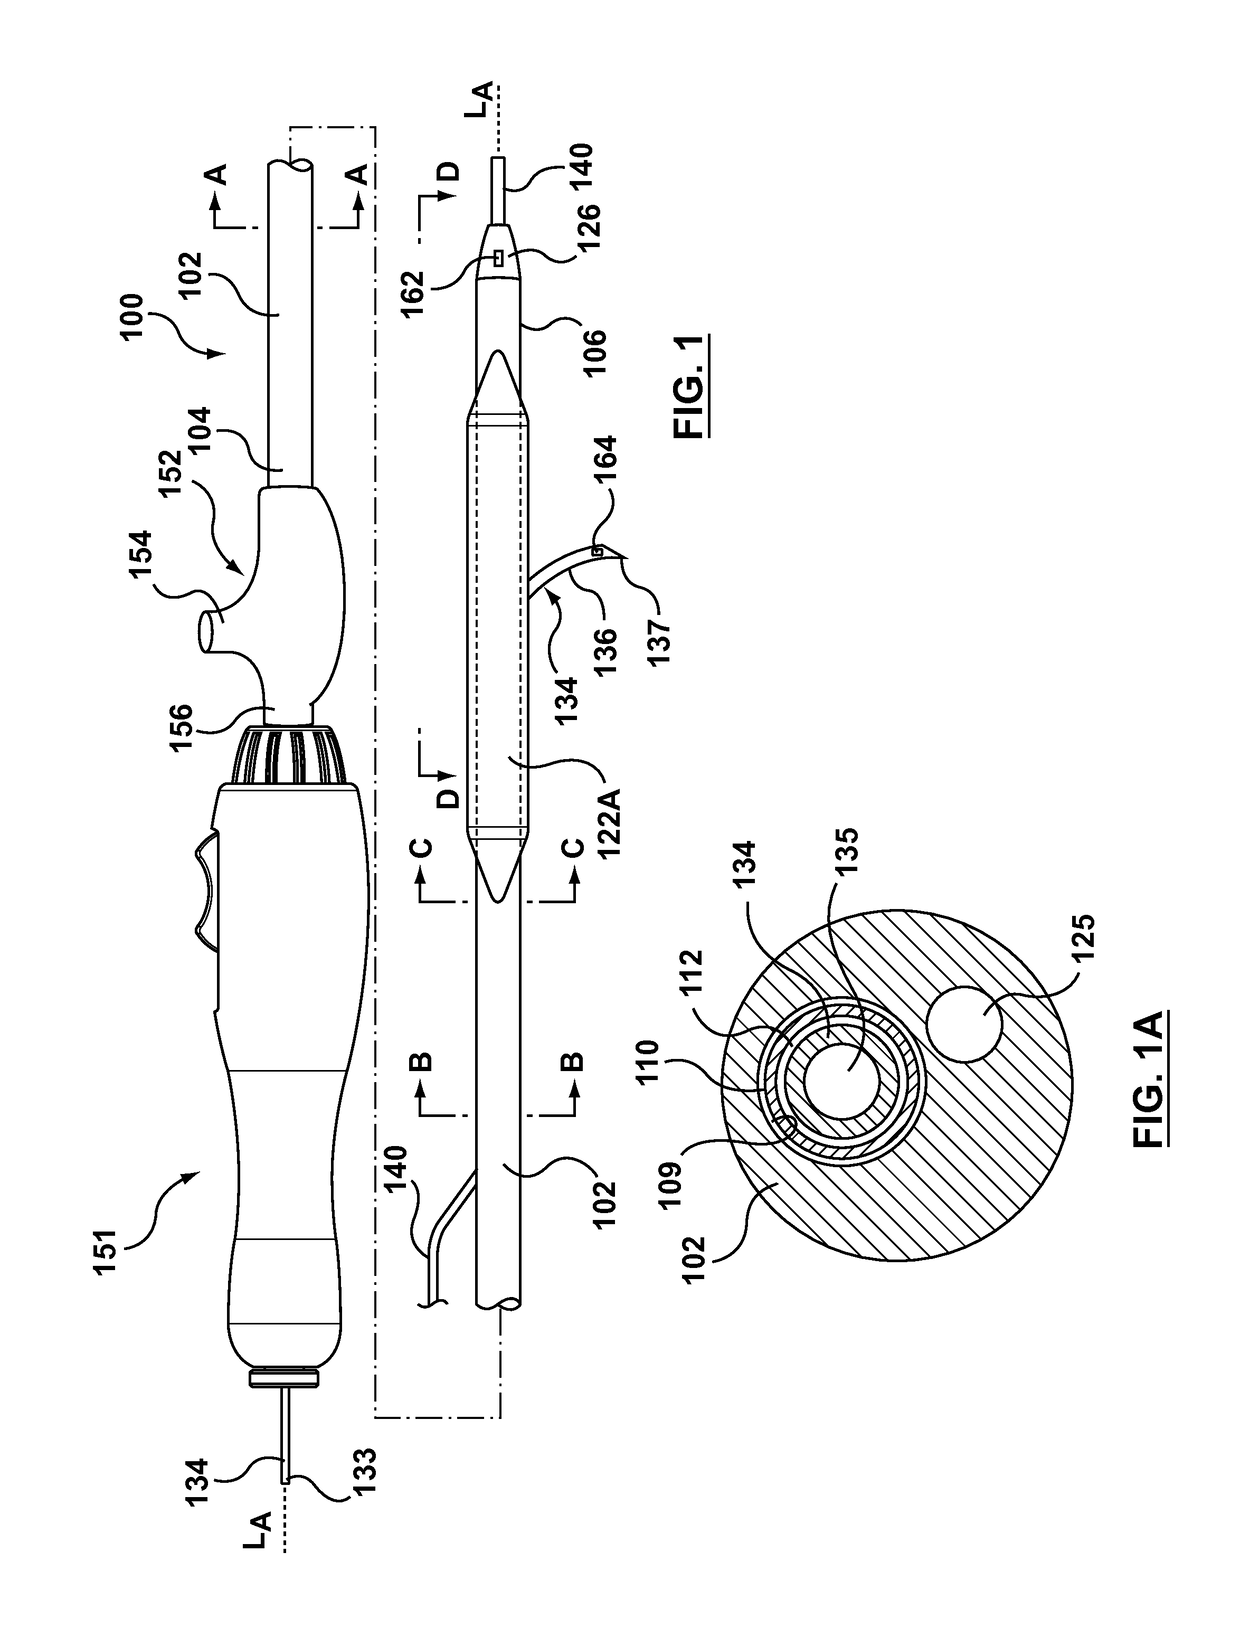 Occlusion Bypassing Apparatus With a Re-Entry Needle and a Stabilization Tube